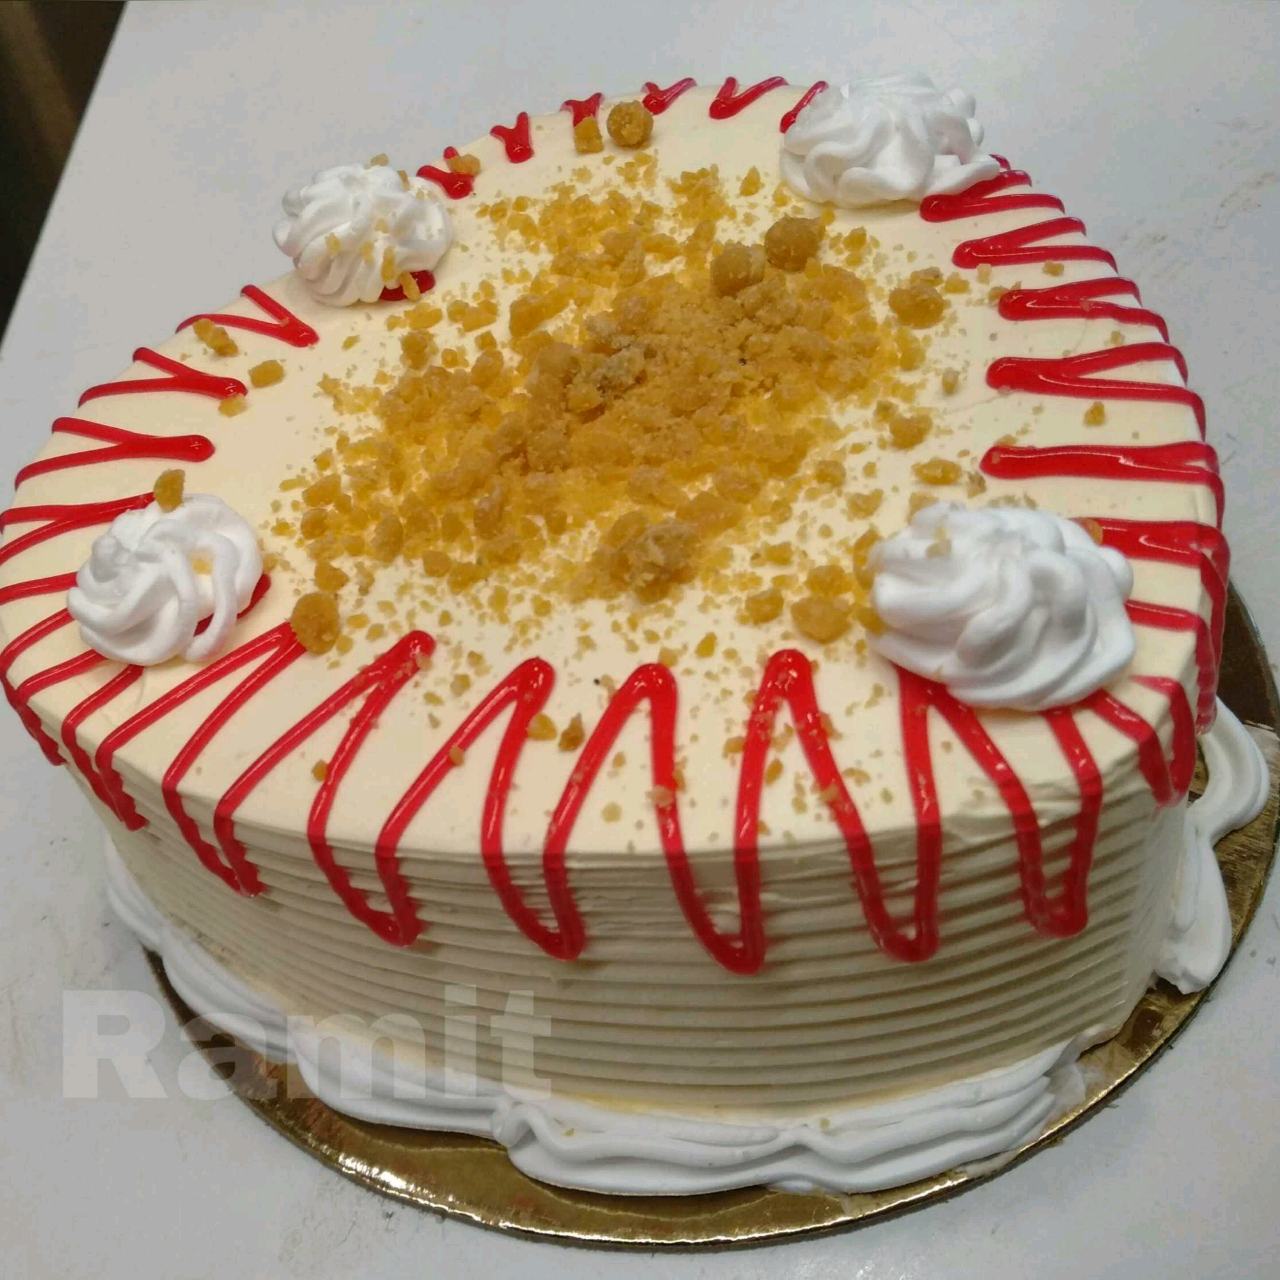 Caramel Crunch Cake Topped With Strawberry Jelly